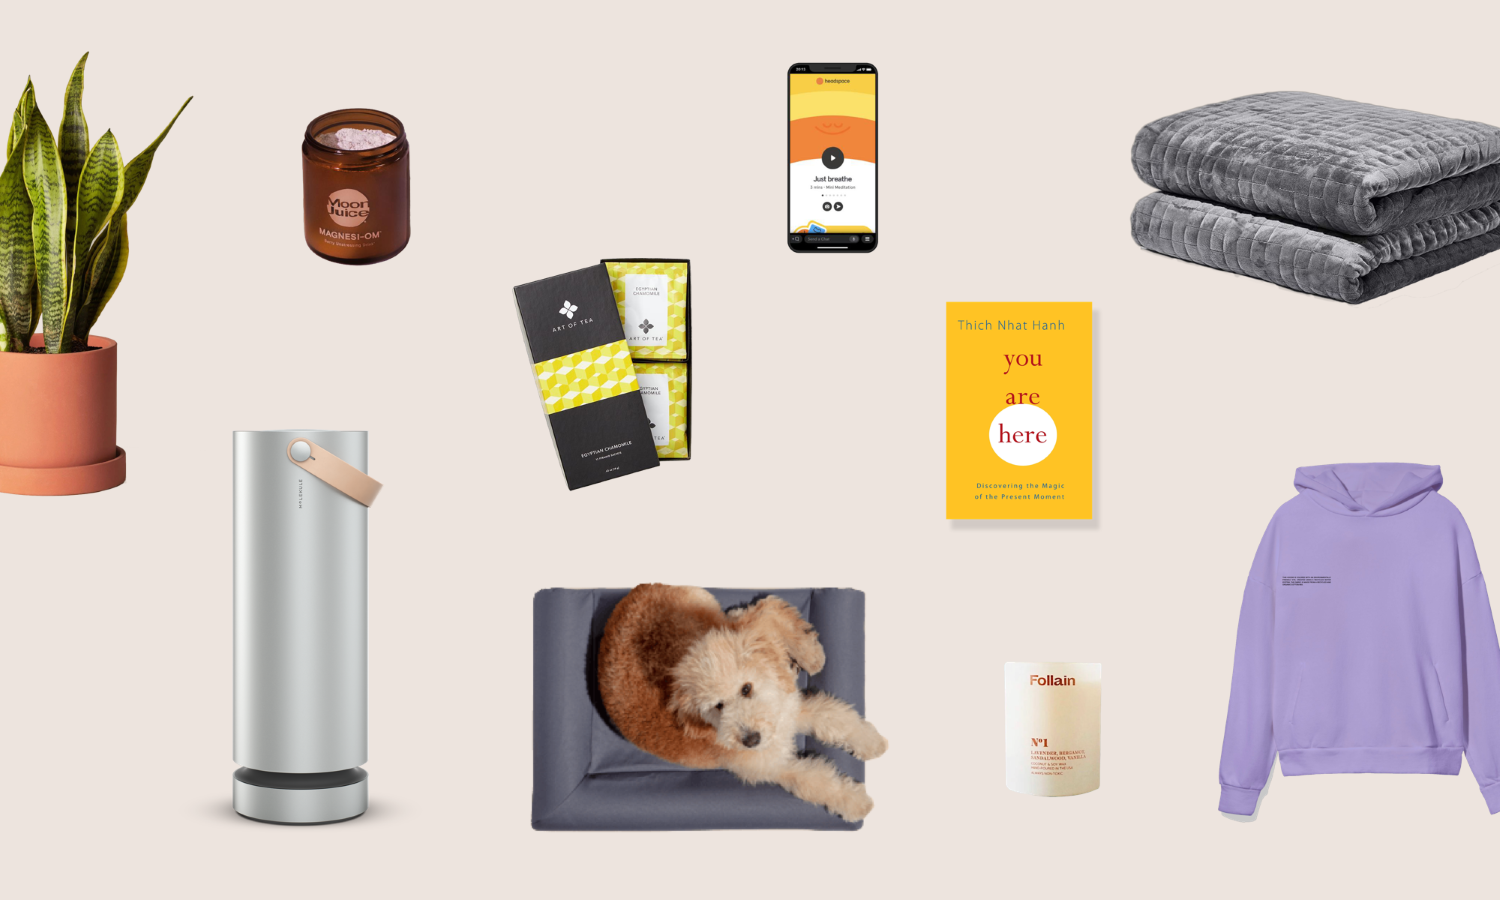 Compilation photo of potential gifts: potted plant, Molekule air purifier, sweatshirt, gray blanket, book, candle, pet bed